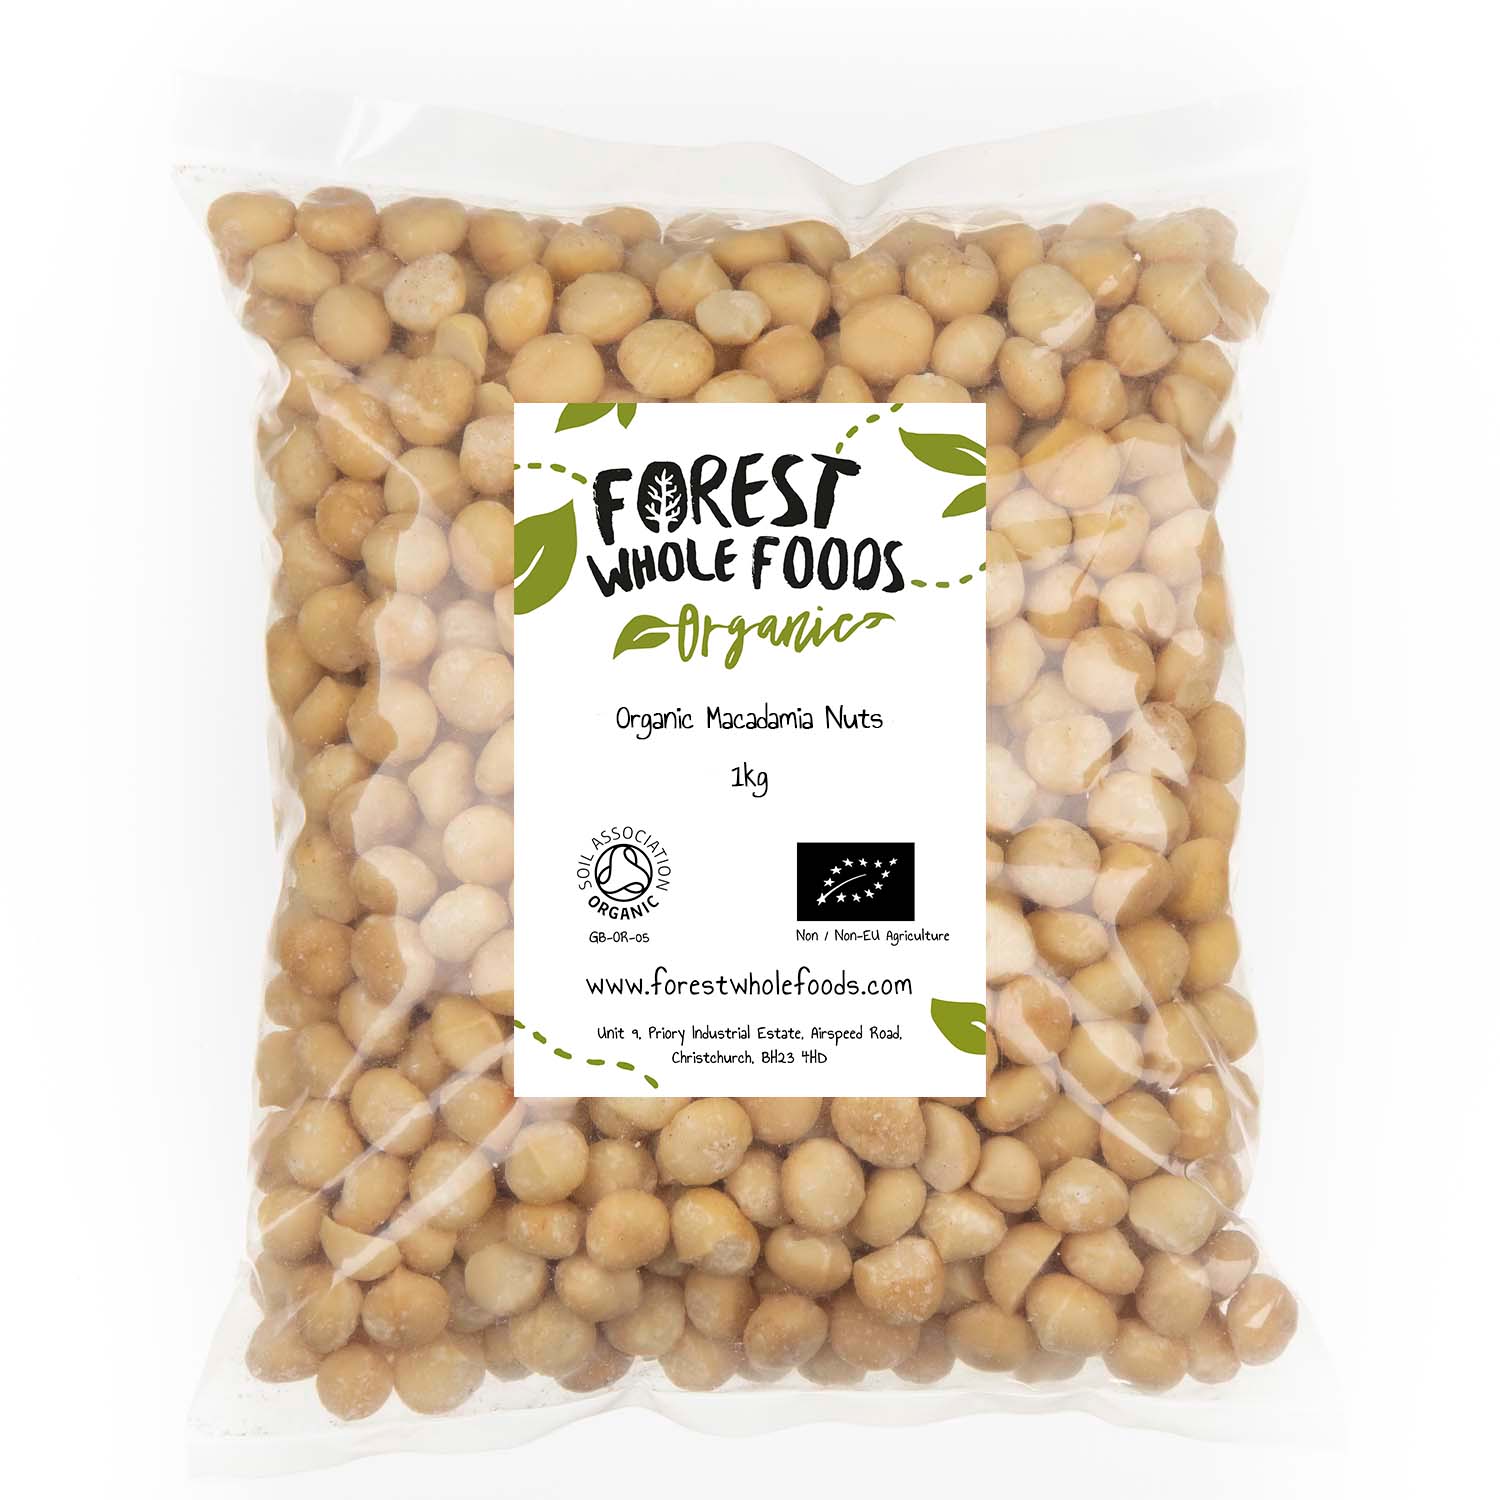 Organic Raw Macadamia Nuts - Forest Whole Foods